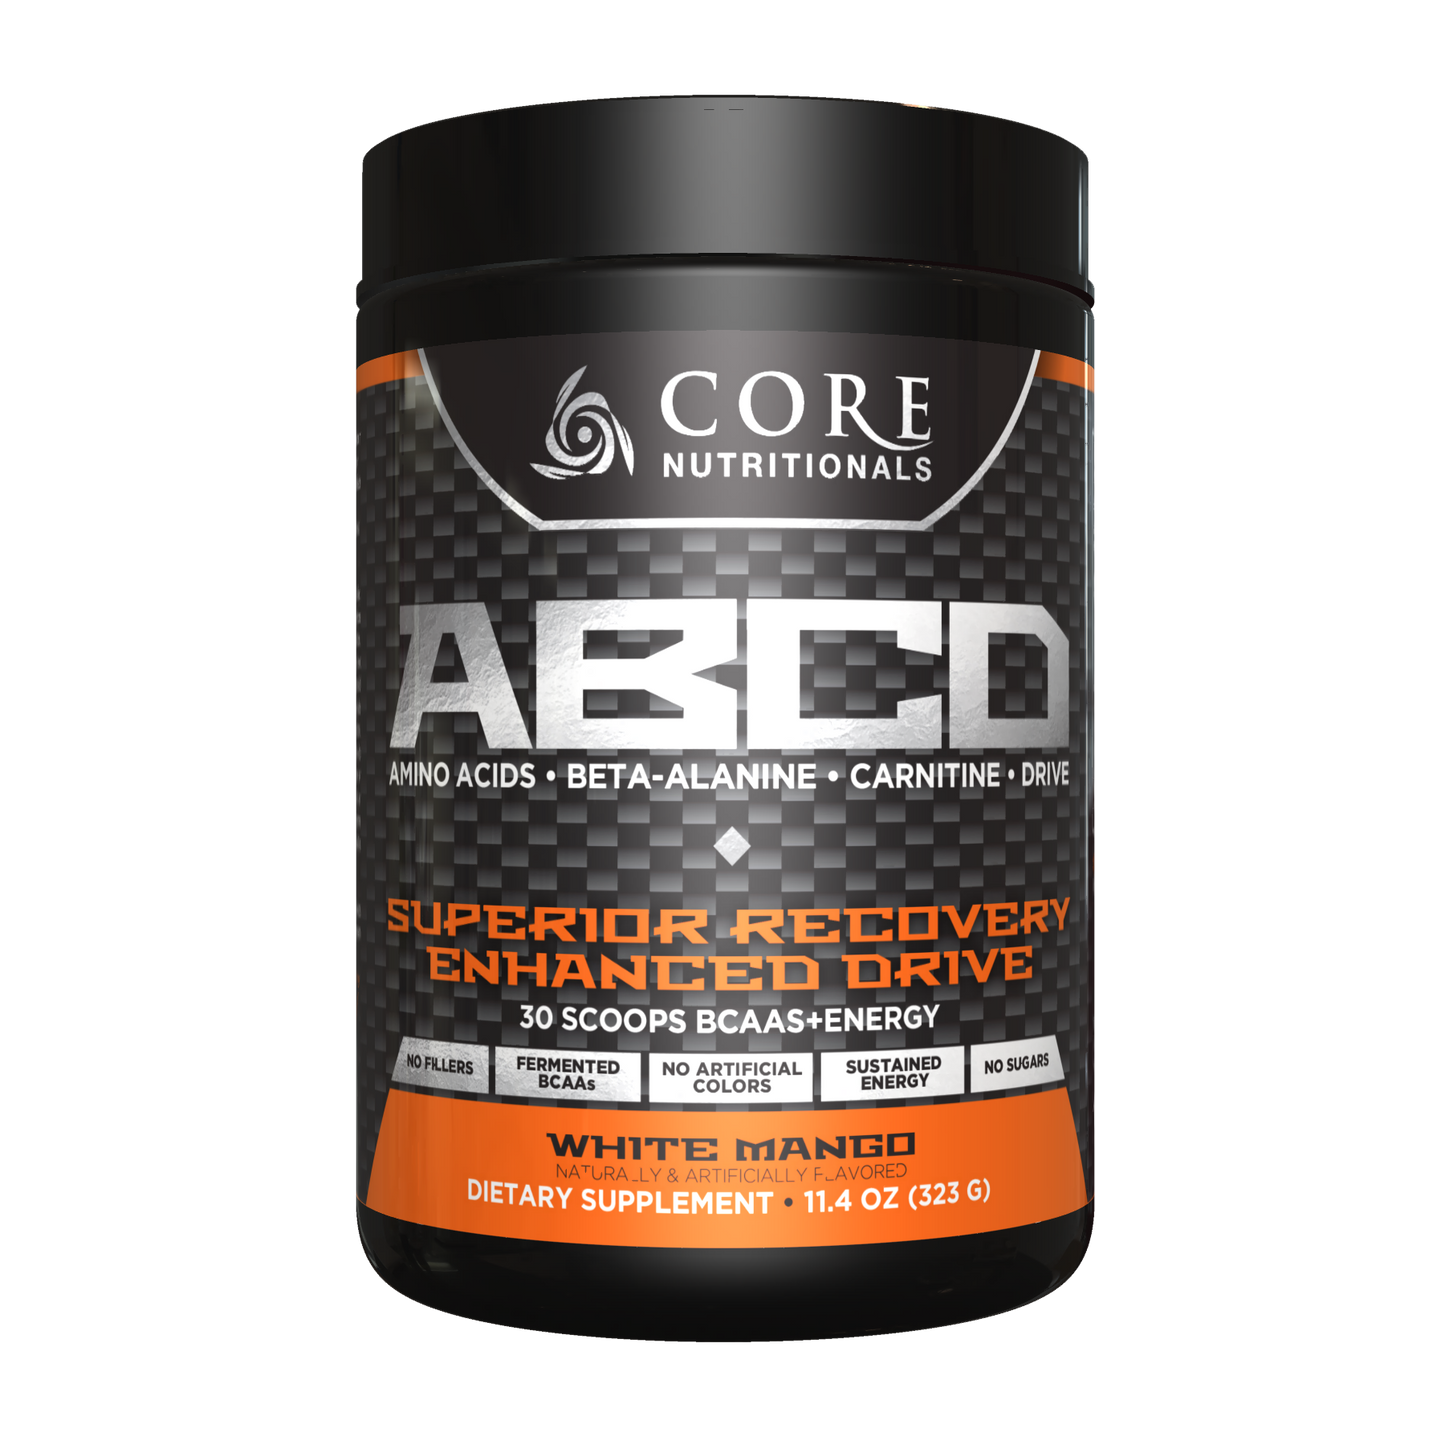 Core Nutritionals ABCD White mango